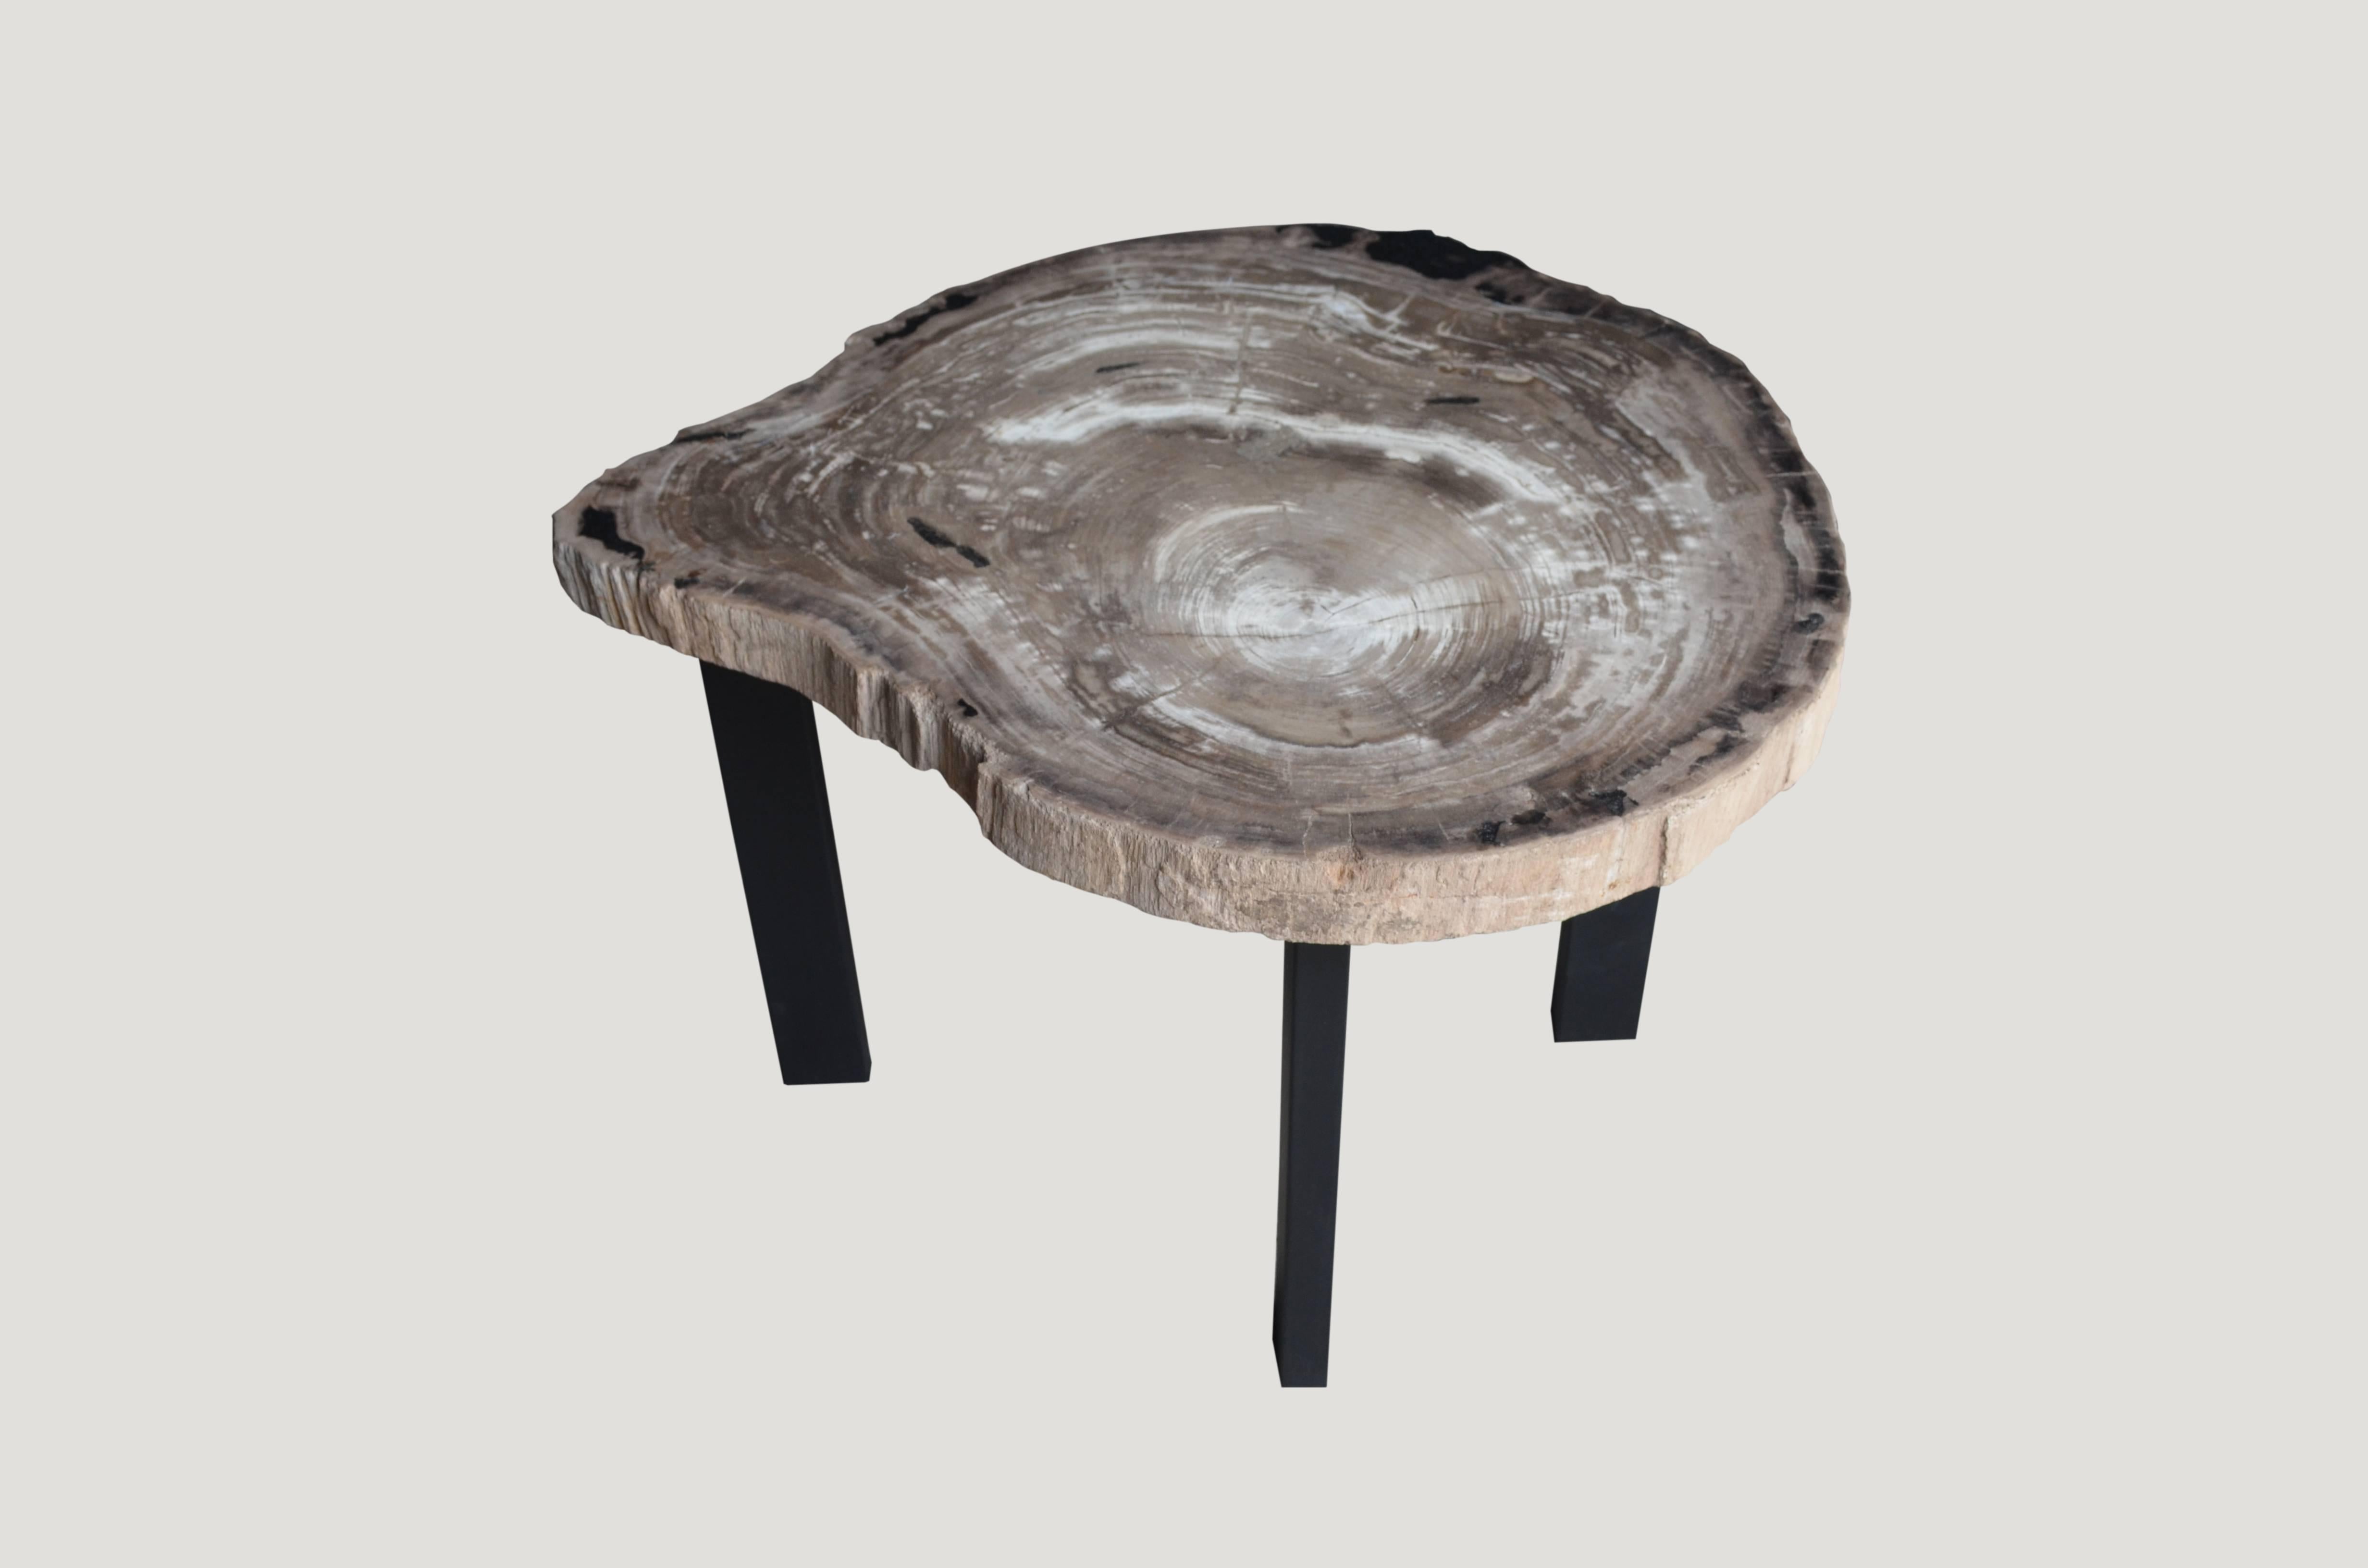 Rare, high quality petrified wood slab side table. Set on a minimalist black steel base.

As with a diamond, we polish the highest quality fossilized petrified wood, using our latest ground breaking technology to reveal its natural beauty and